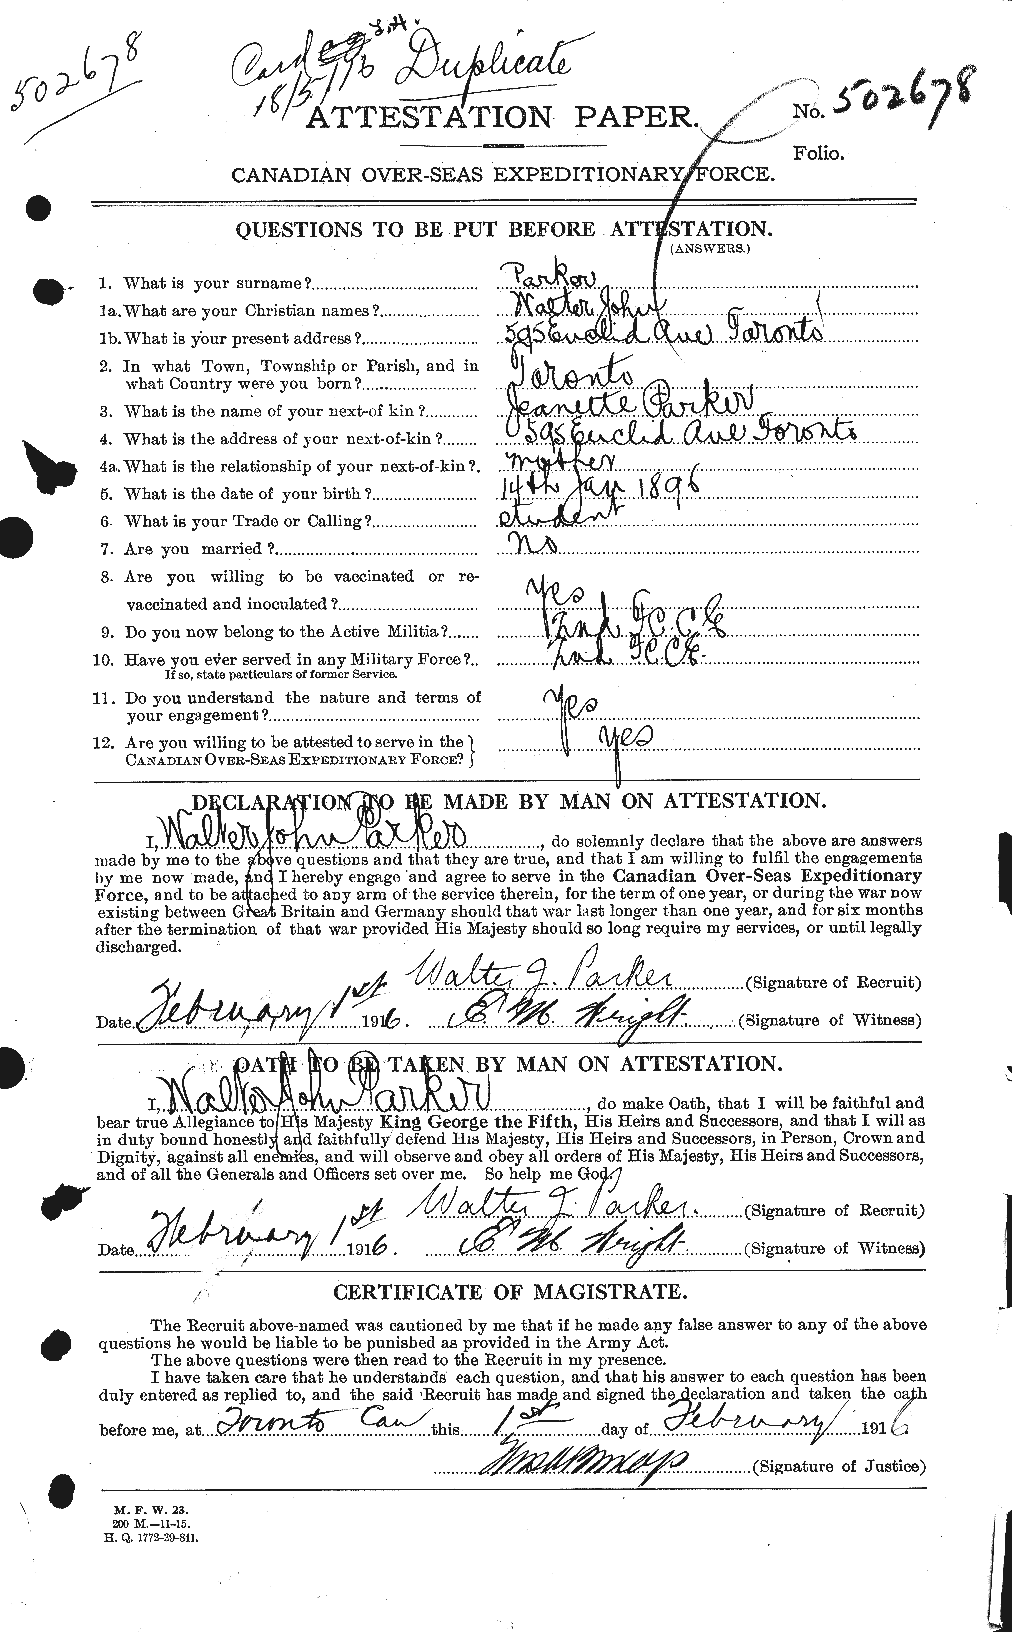 Personnel Records of the First World War - CEF 565696a